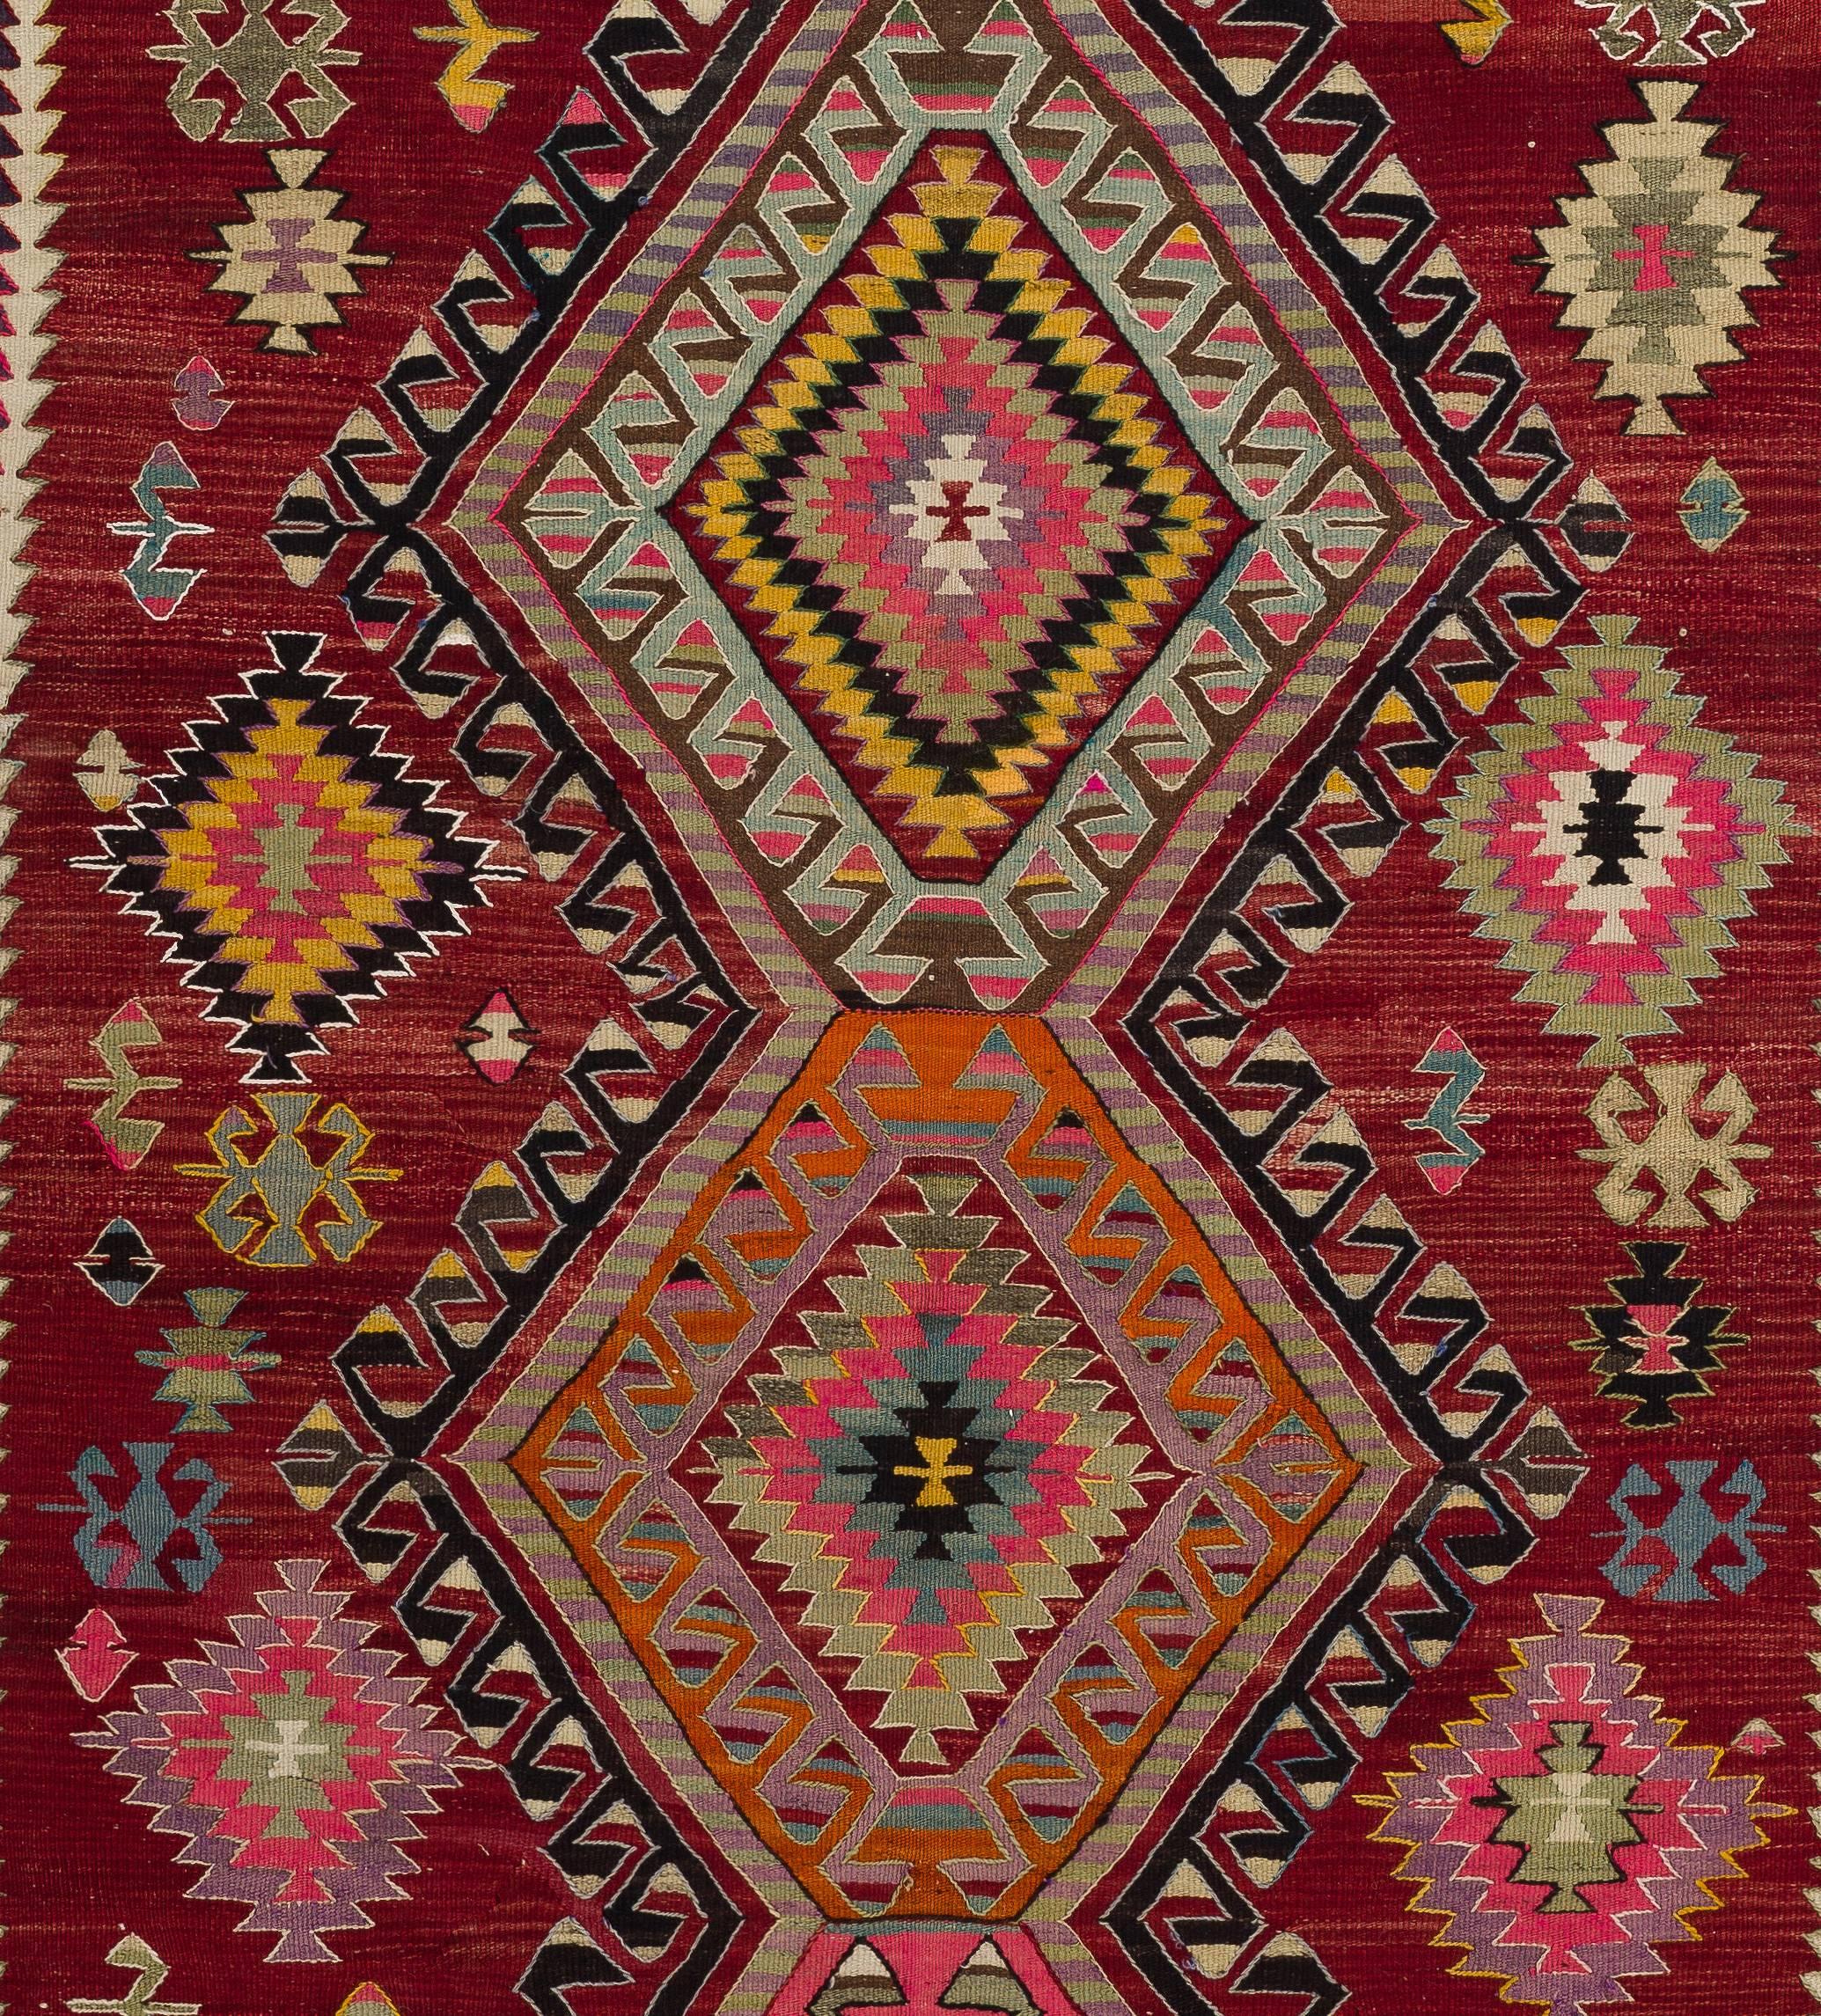 A colorful Turkish Kilim (flat-woven rug) in excellent original condition. It is finely handwoven in naturally dyed wool.